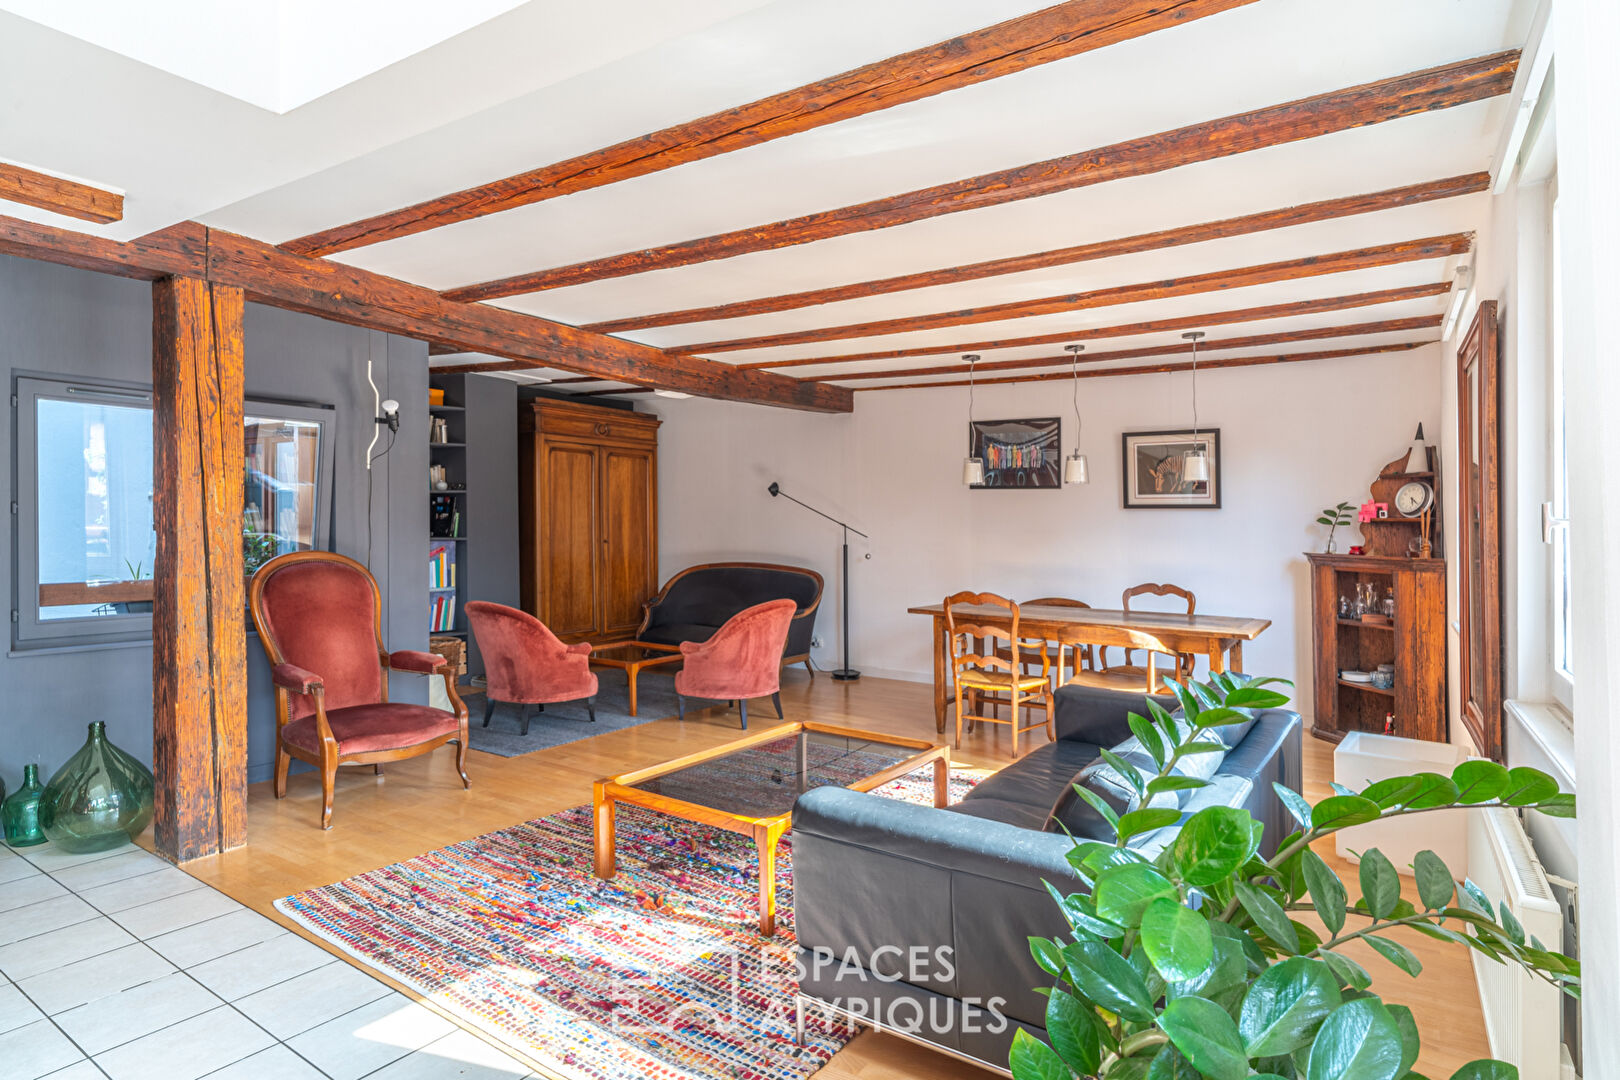 Duplex apartment with terrace in the heart of Petite France